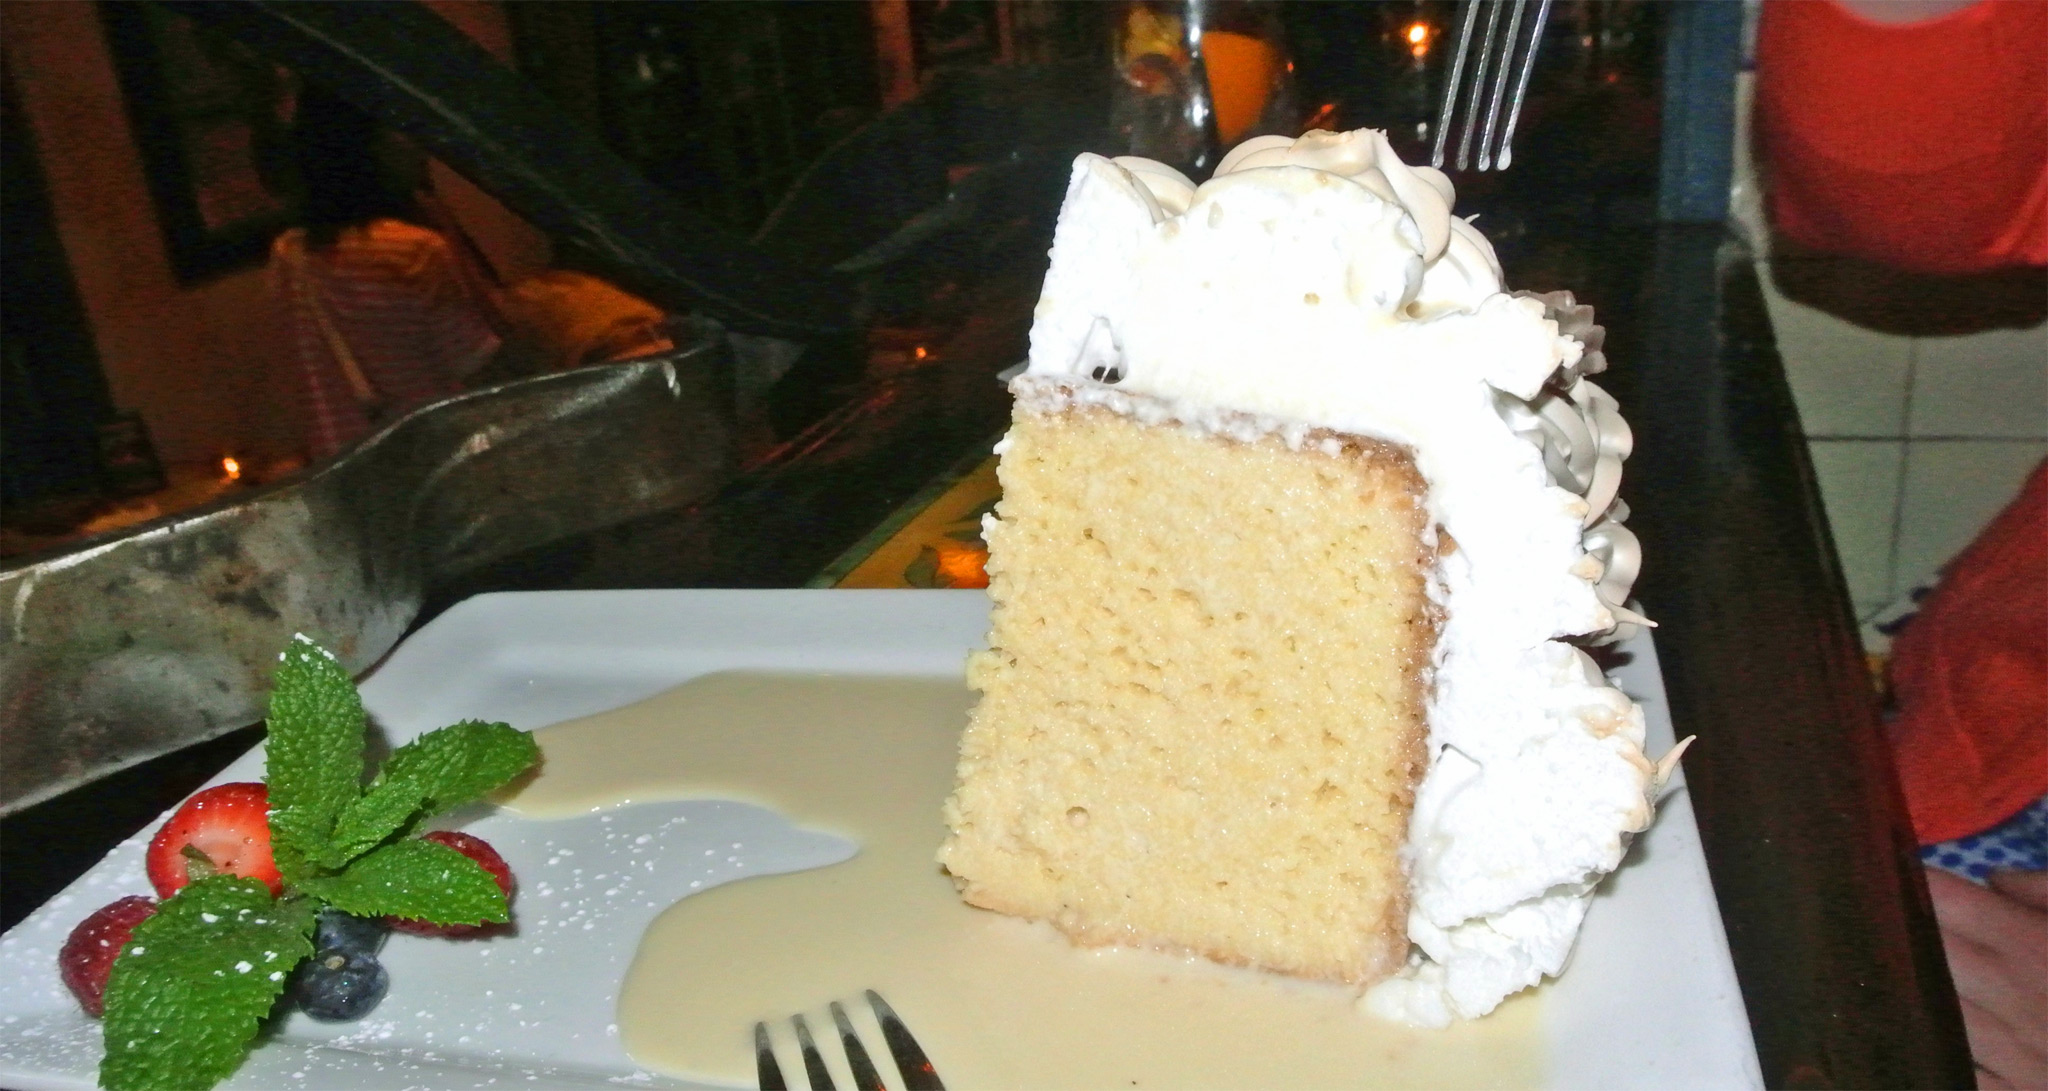 Tres Leches - The famous meringue cake with fresh cream and nutmeg